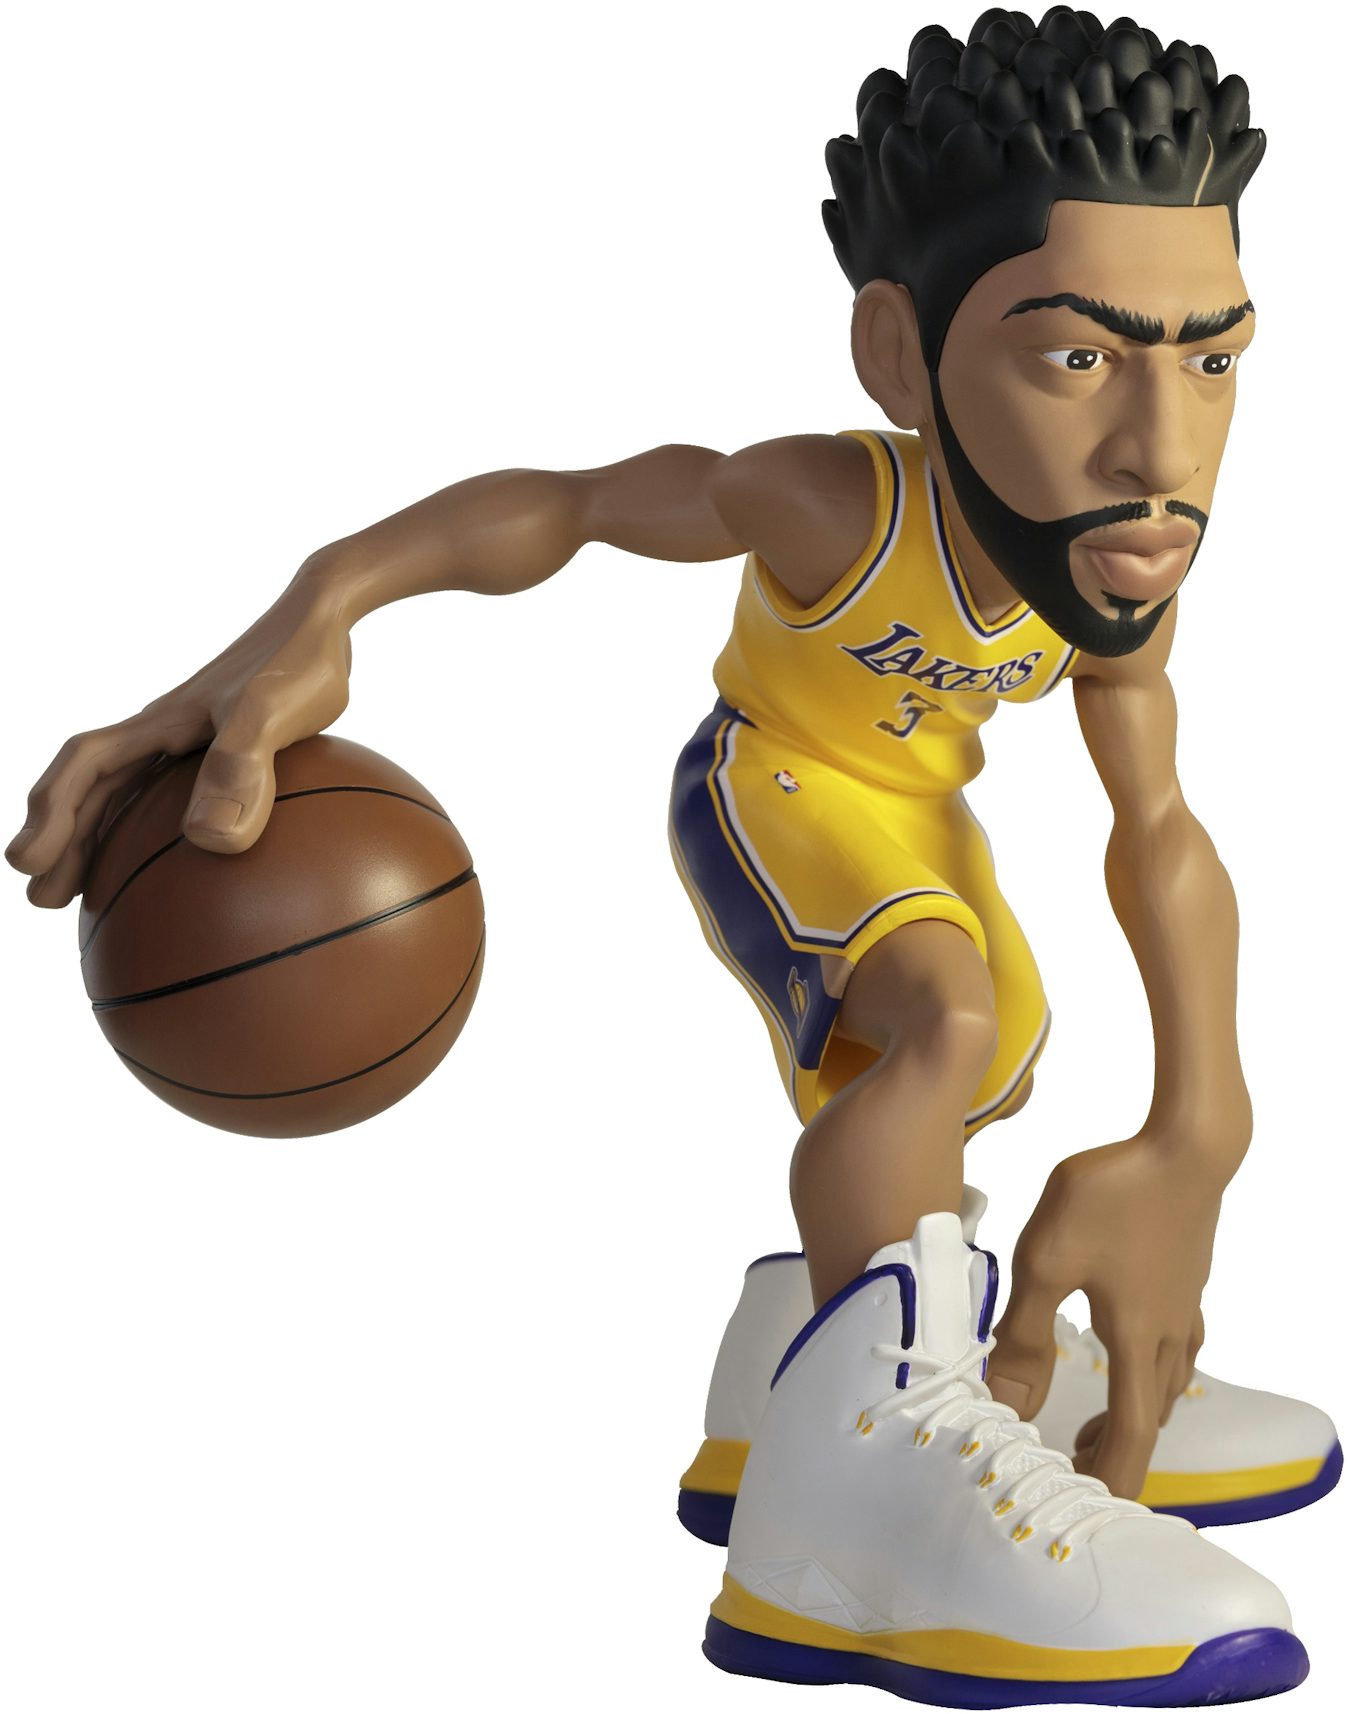 NBA Small Stars Anthony Davis Action Figure Lakers 2019-20 Jersey Gold - US